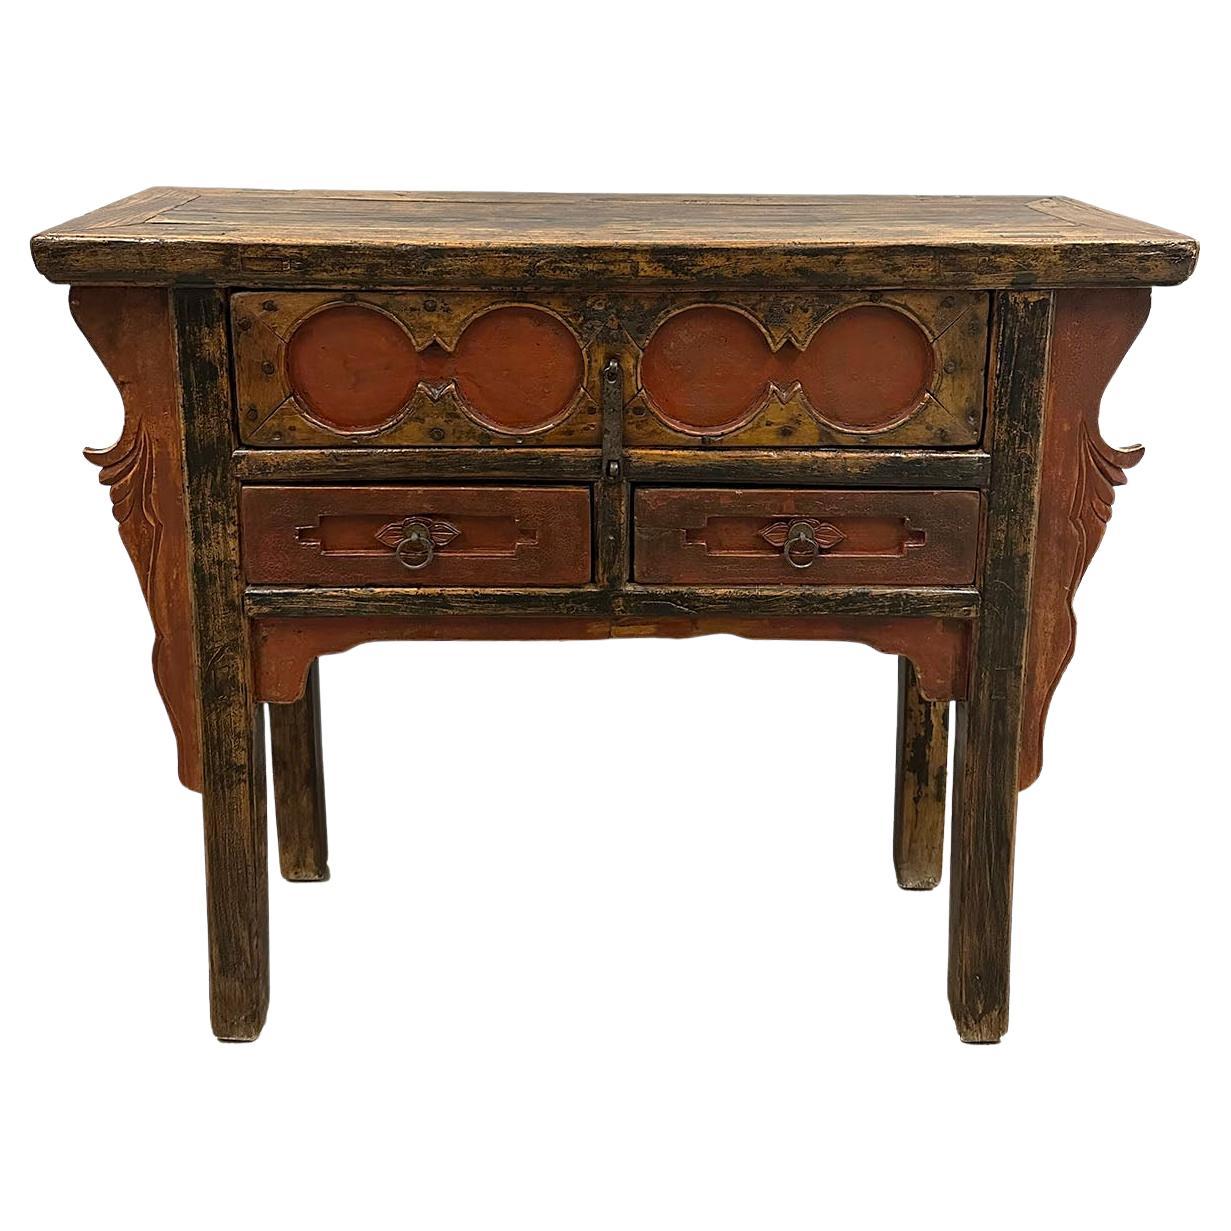 19th Century Antique Chinese Carved 3 Drawers Console Table